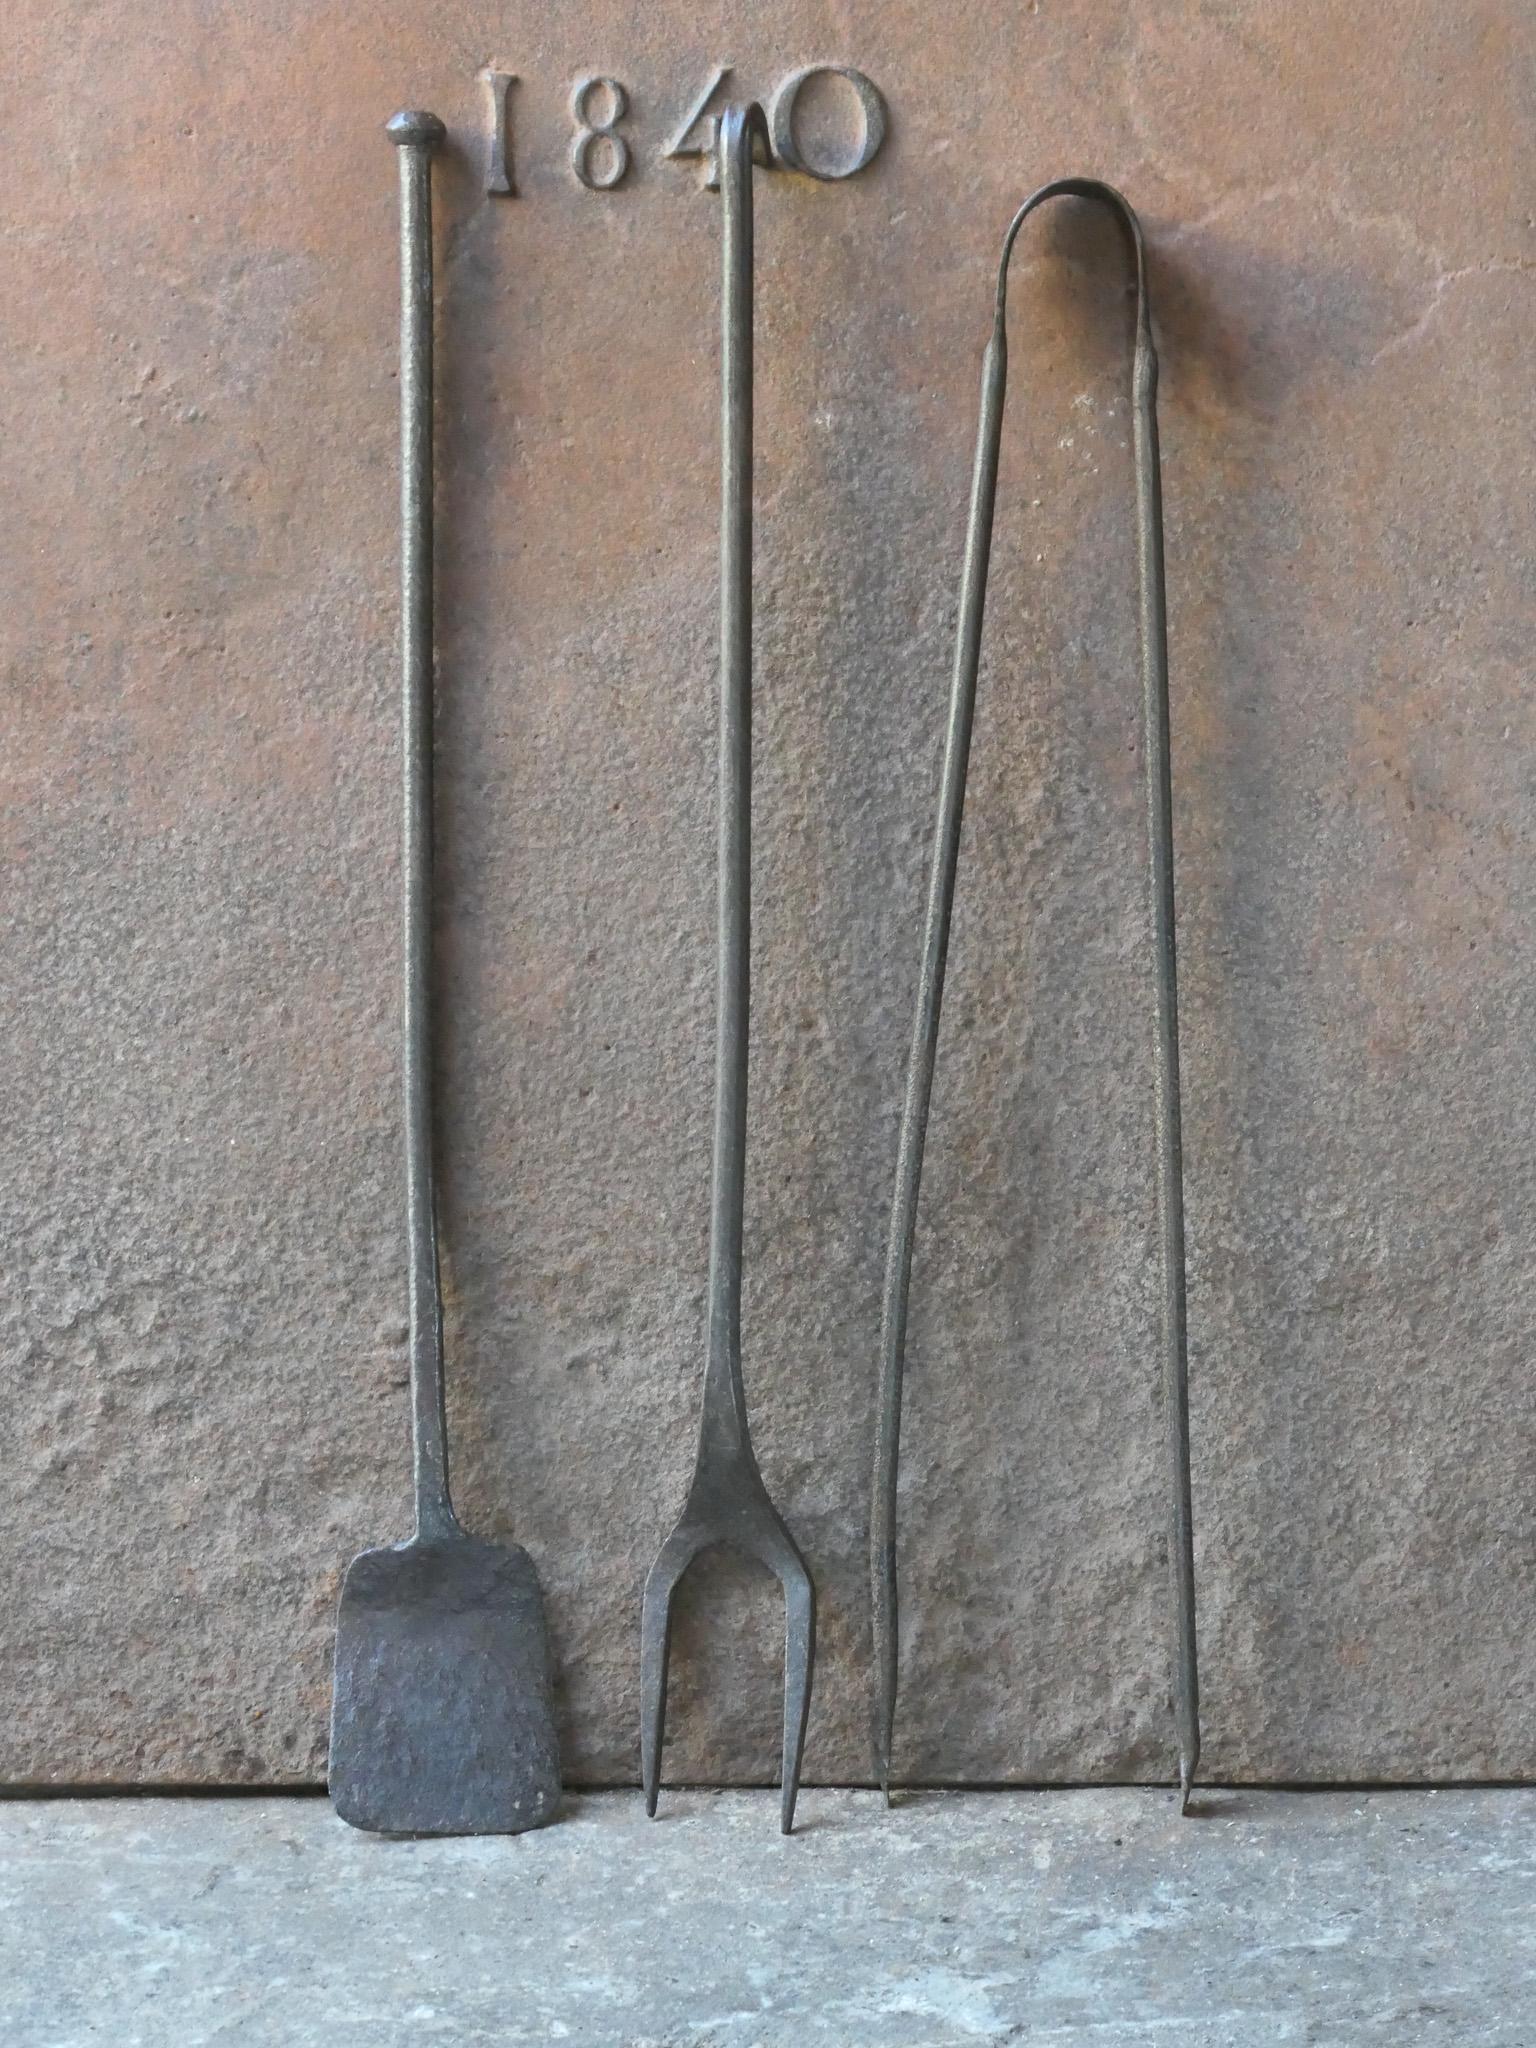 18th century French fireplace tool set. The tool set consists of tongs, shovel, and a fire fork. The tools are made of wrought iron. The set is in a good condition and fit for use in the fireplace.